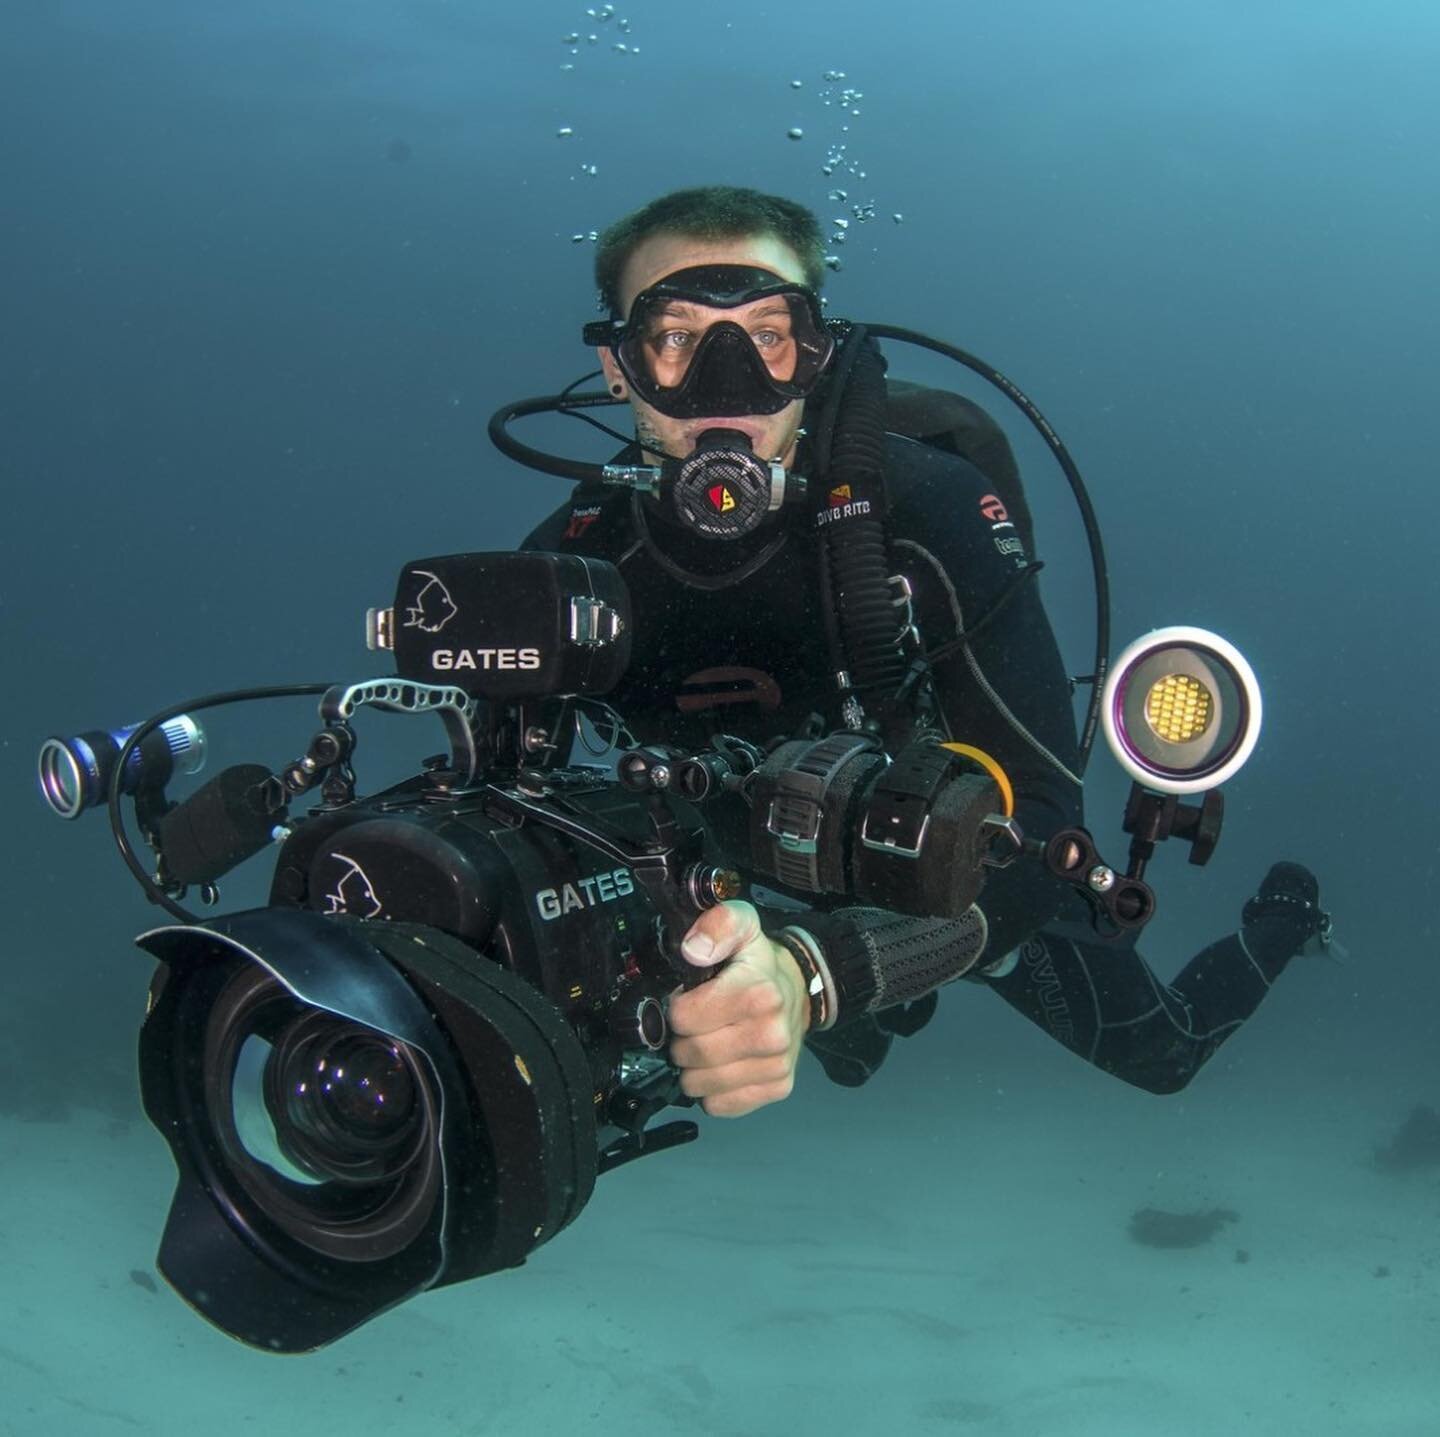 Just as comfortable 20 metres underwater as with our feet firmly on the ground, here at Four Corners we love the challenge of an underwater shoot. We&rsquo;ve missed this kind of adventures during the pandemic, but we in the process laying the ground